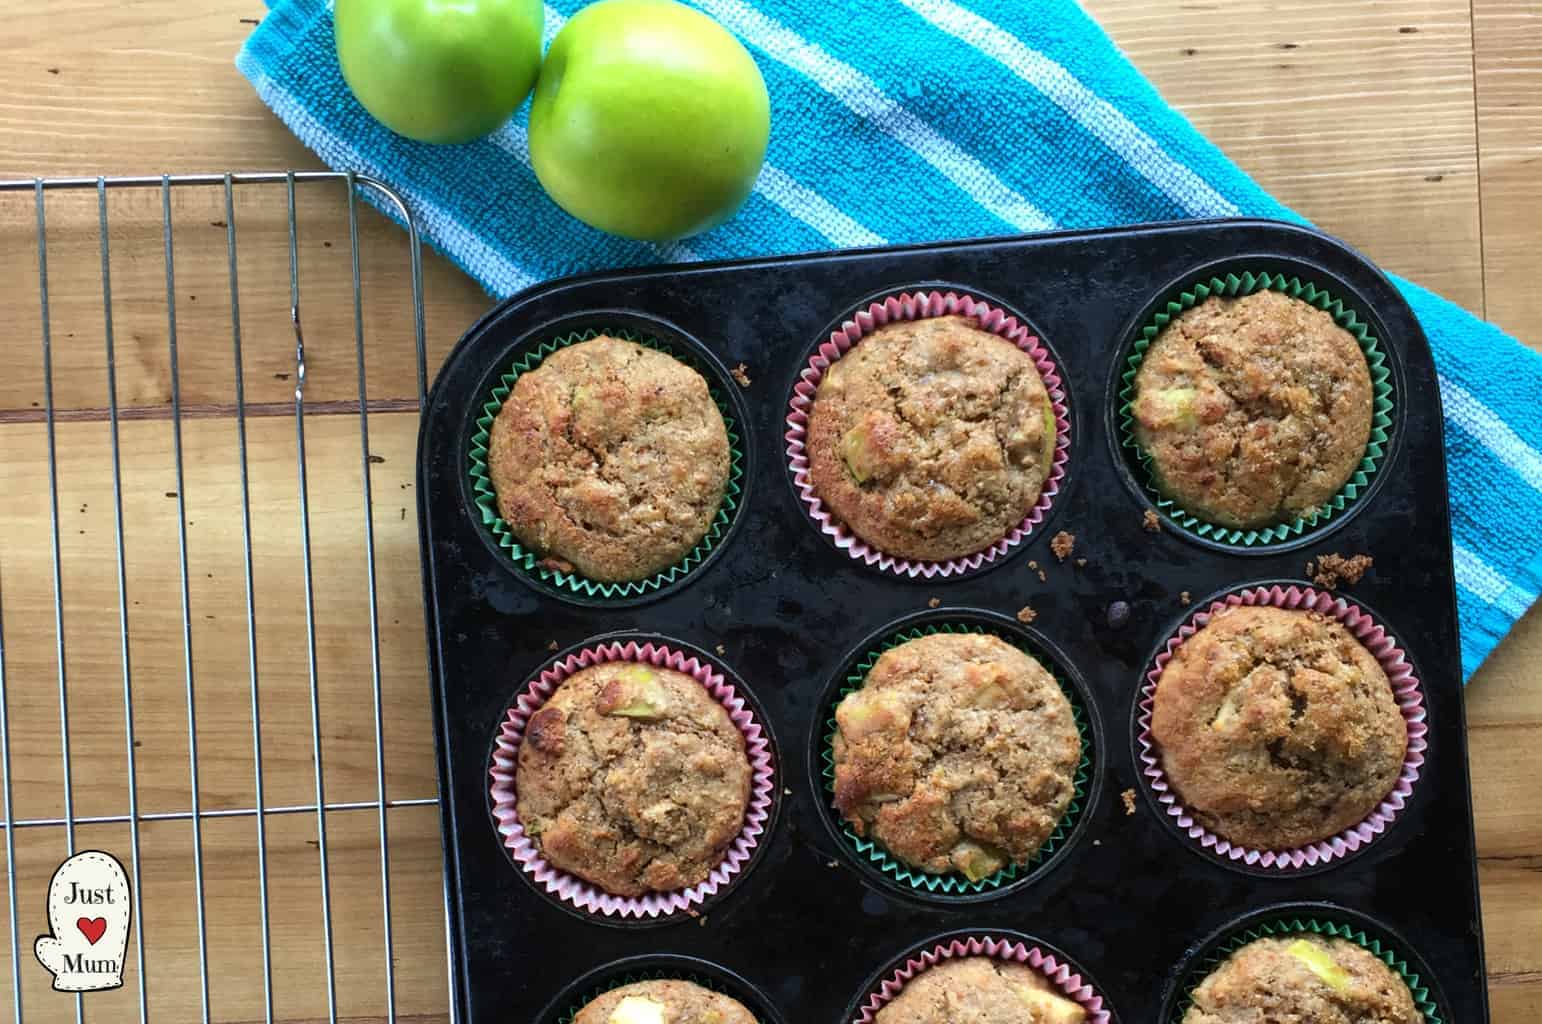 Just A Mum's Healthy Apple & Maple Syrup Muffins 